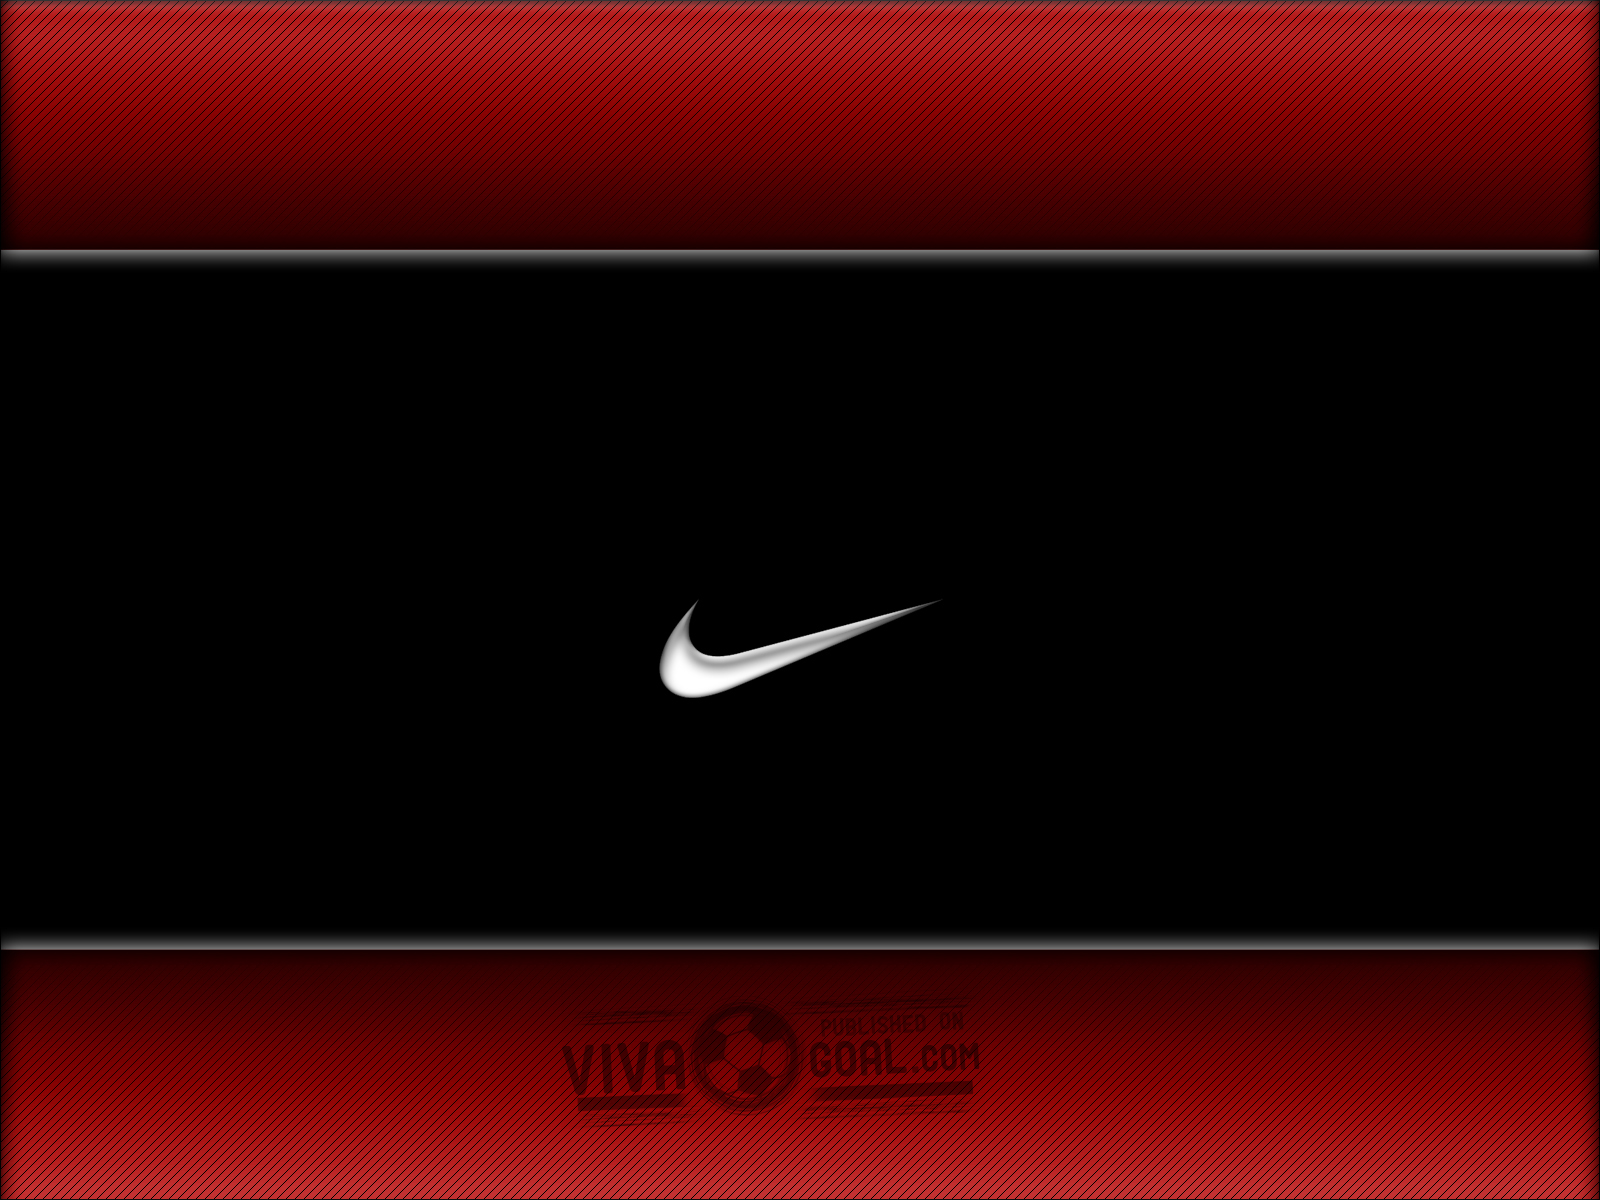 Nike Football Background Image Amp Pictures Becuo